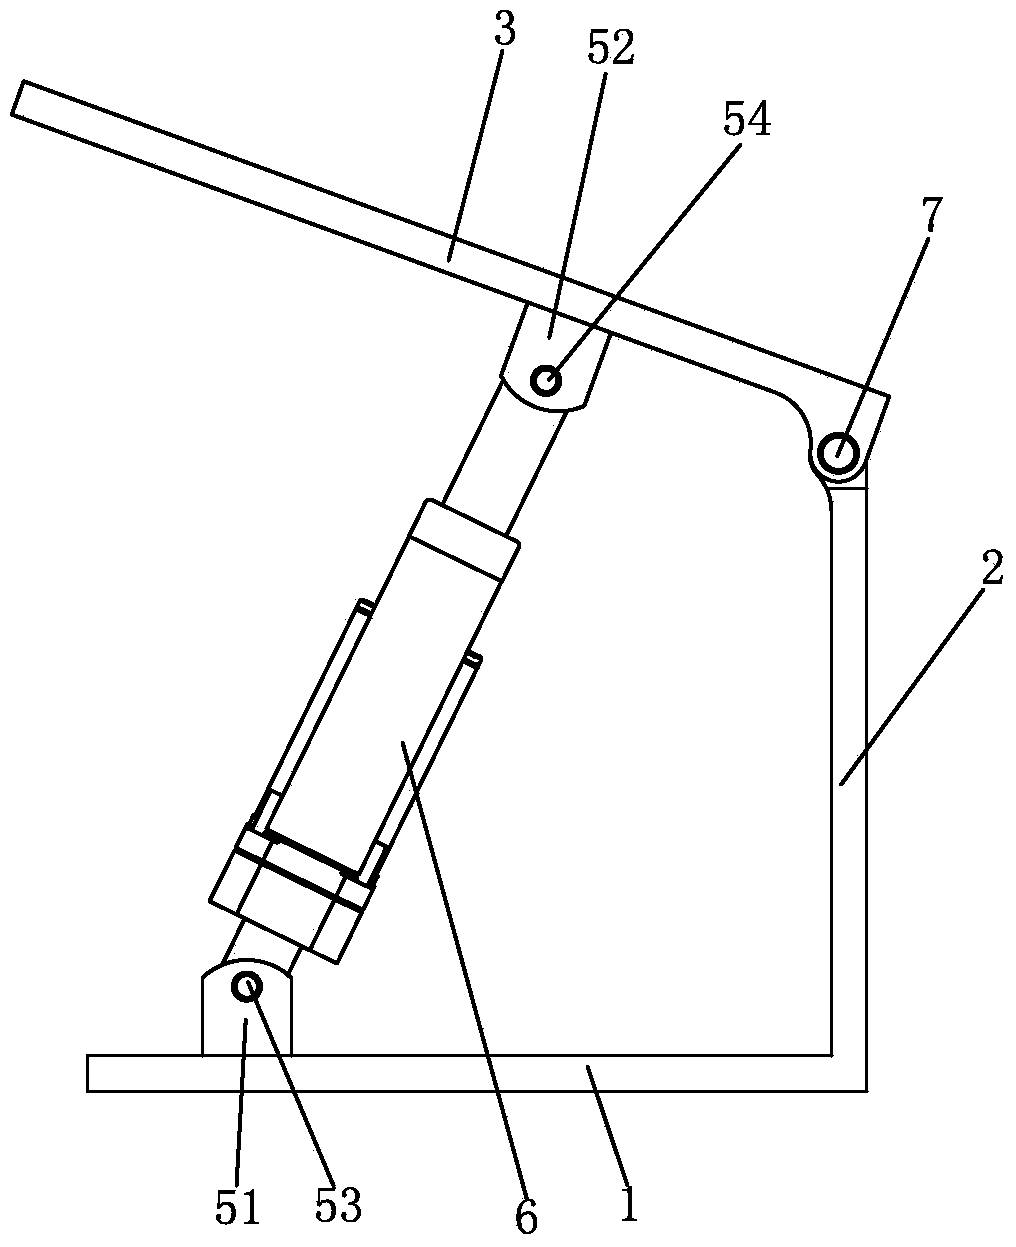 Lever positioning technique treatment adjusting device